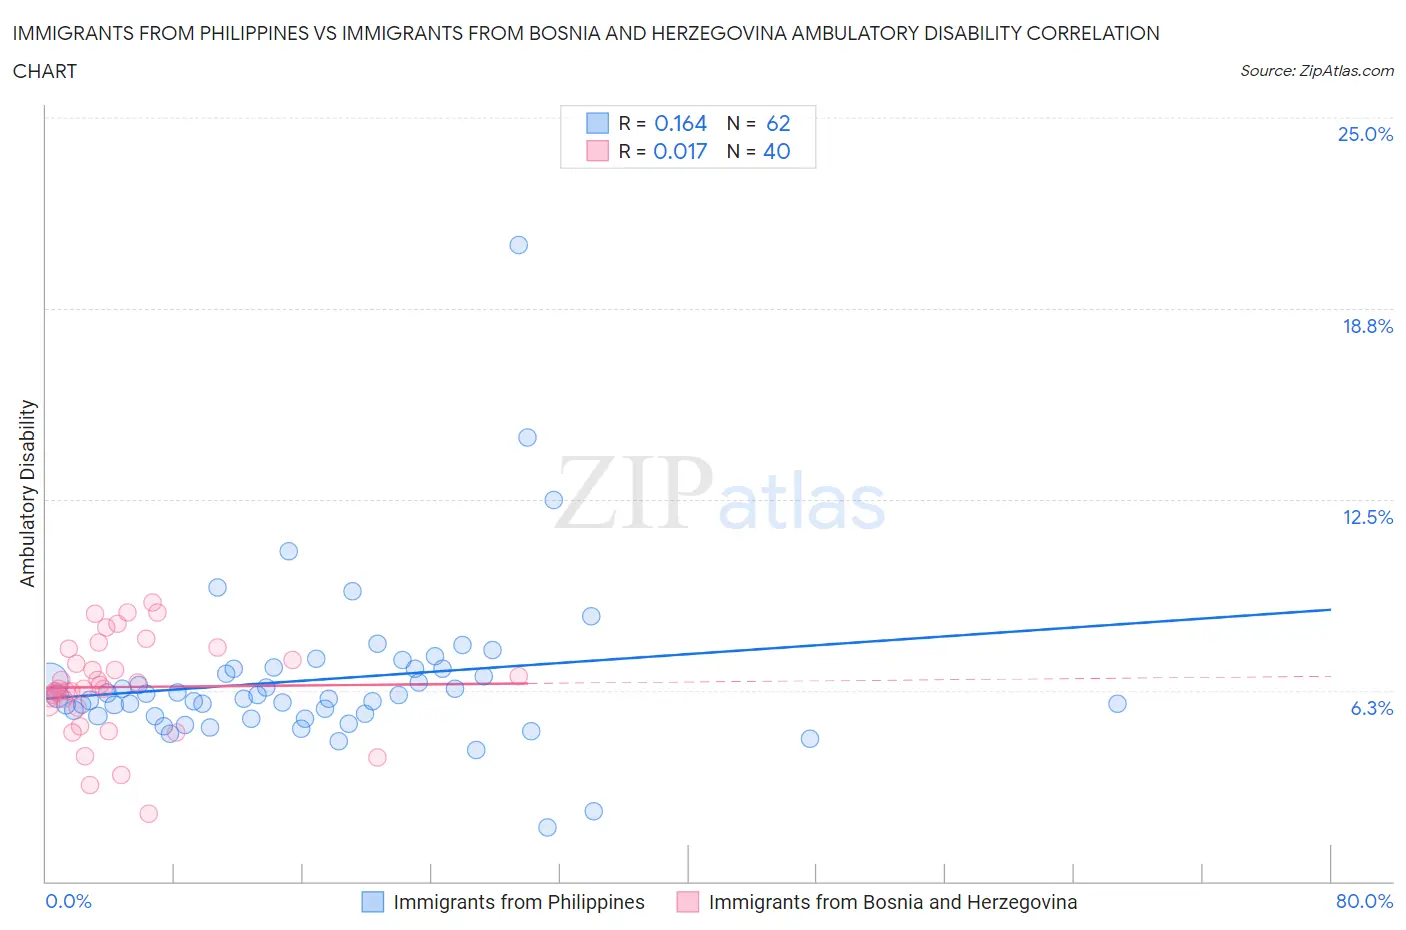 Immigrants from Philippines vs Immigrants from Bosnia and Herzegovina Ambulatory Disability